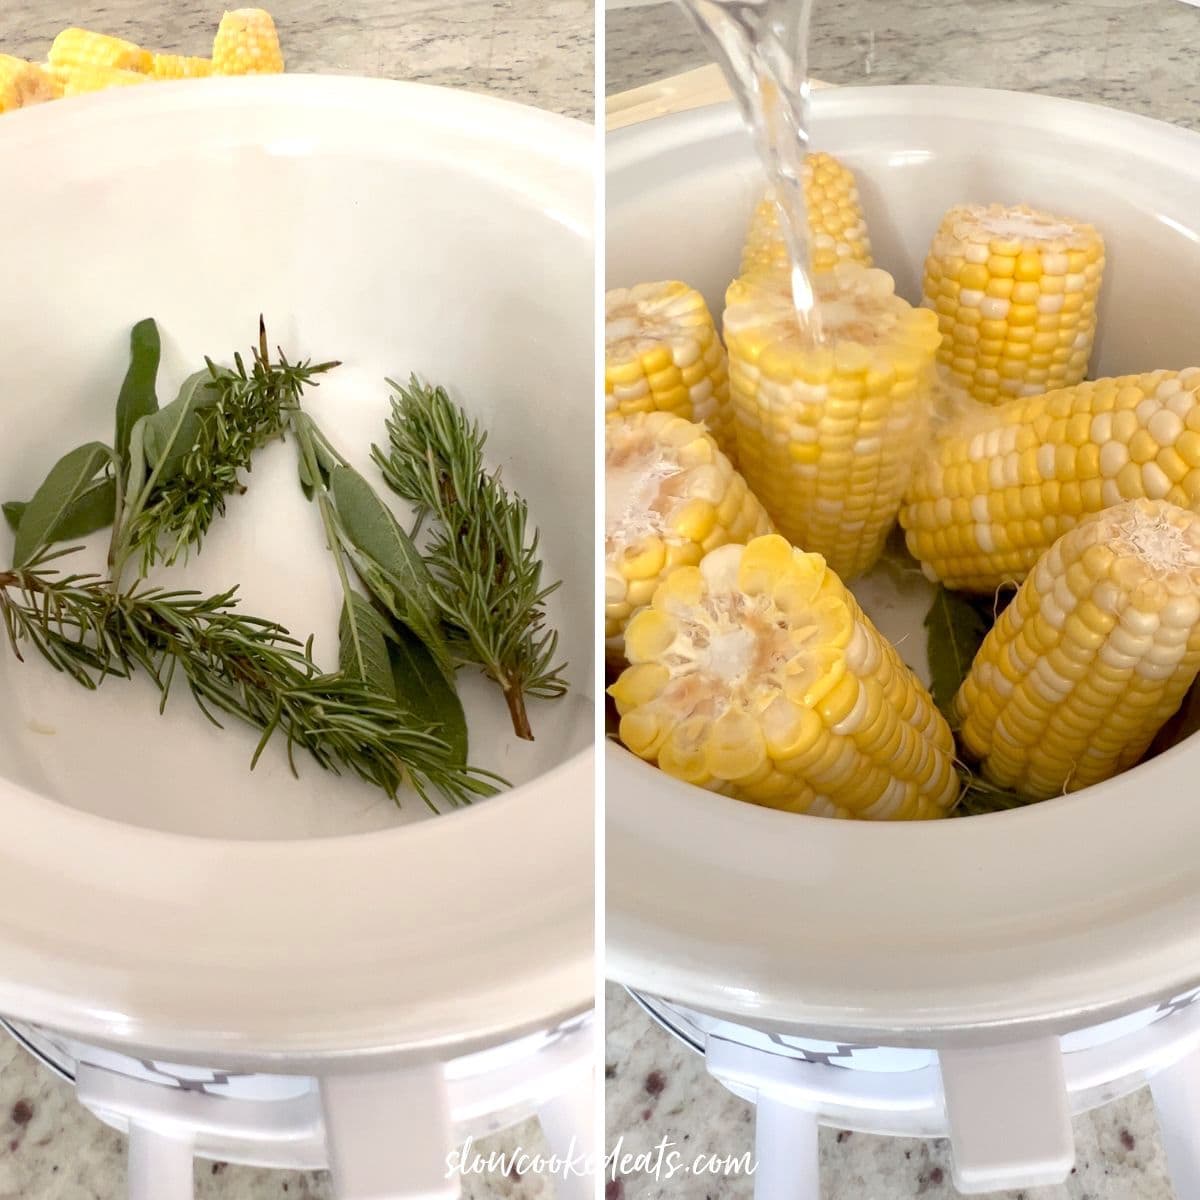 Adding herbs, corn, and water to a white oval slow cooker.